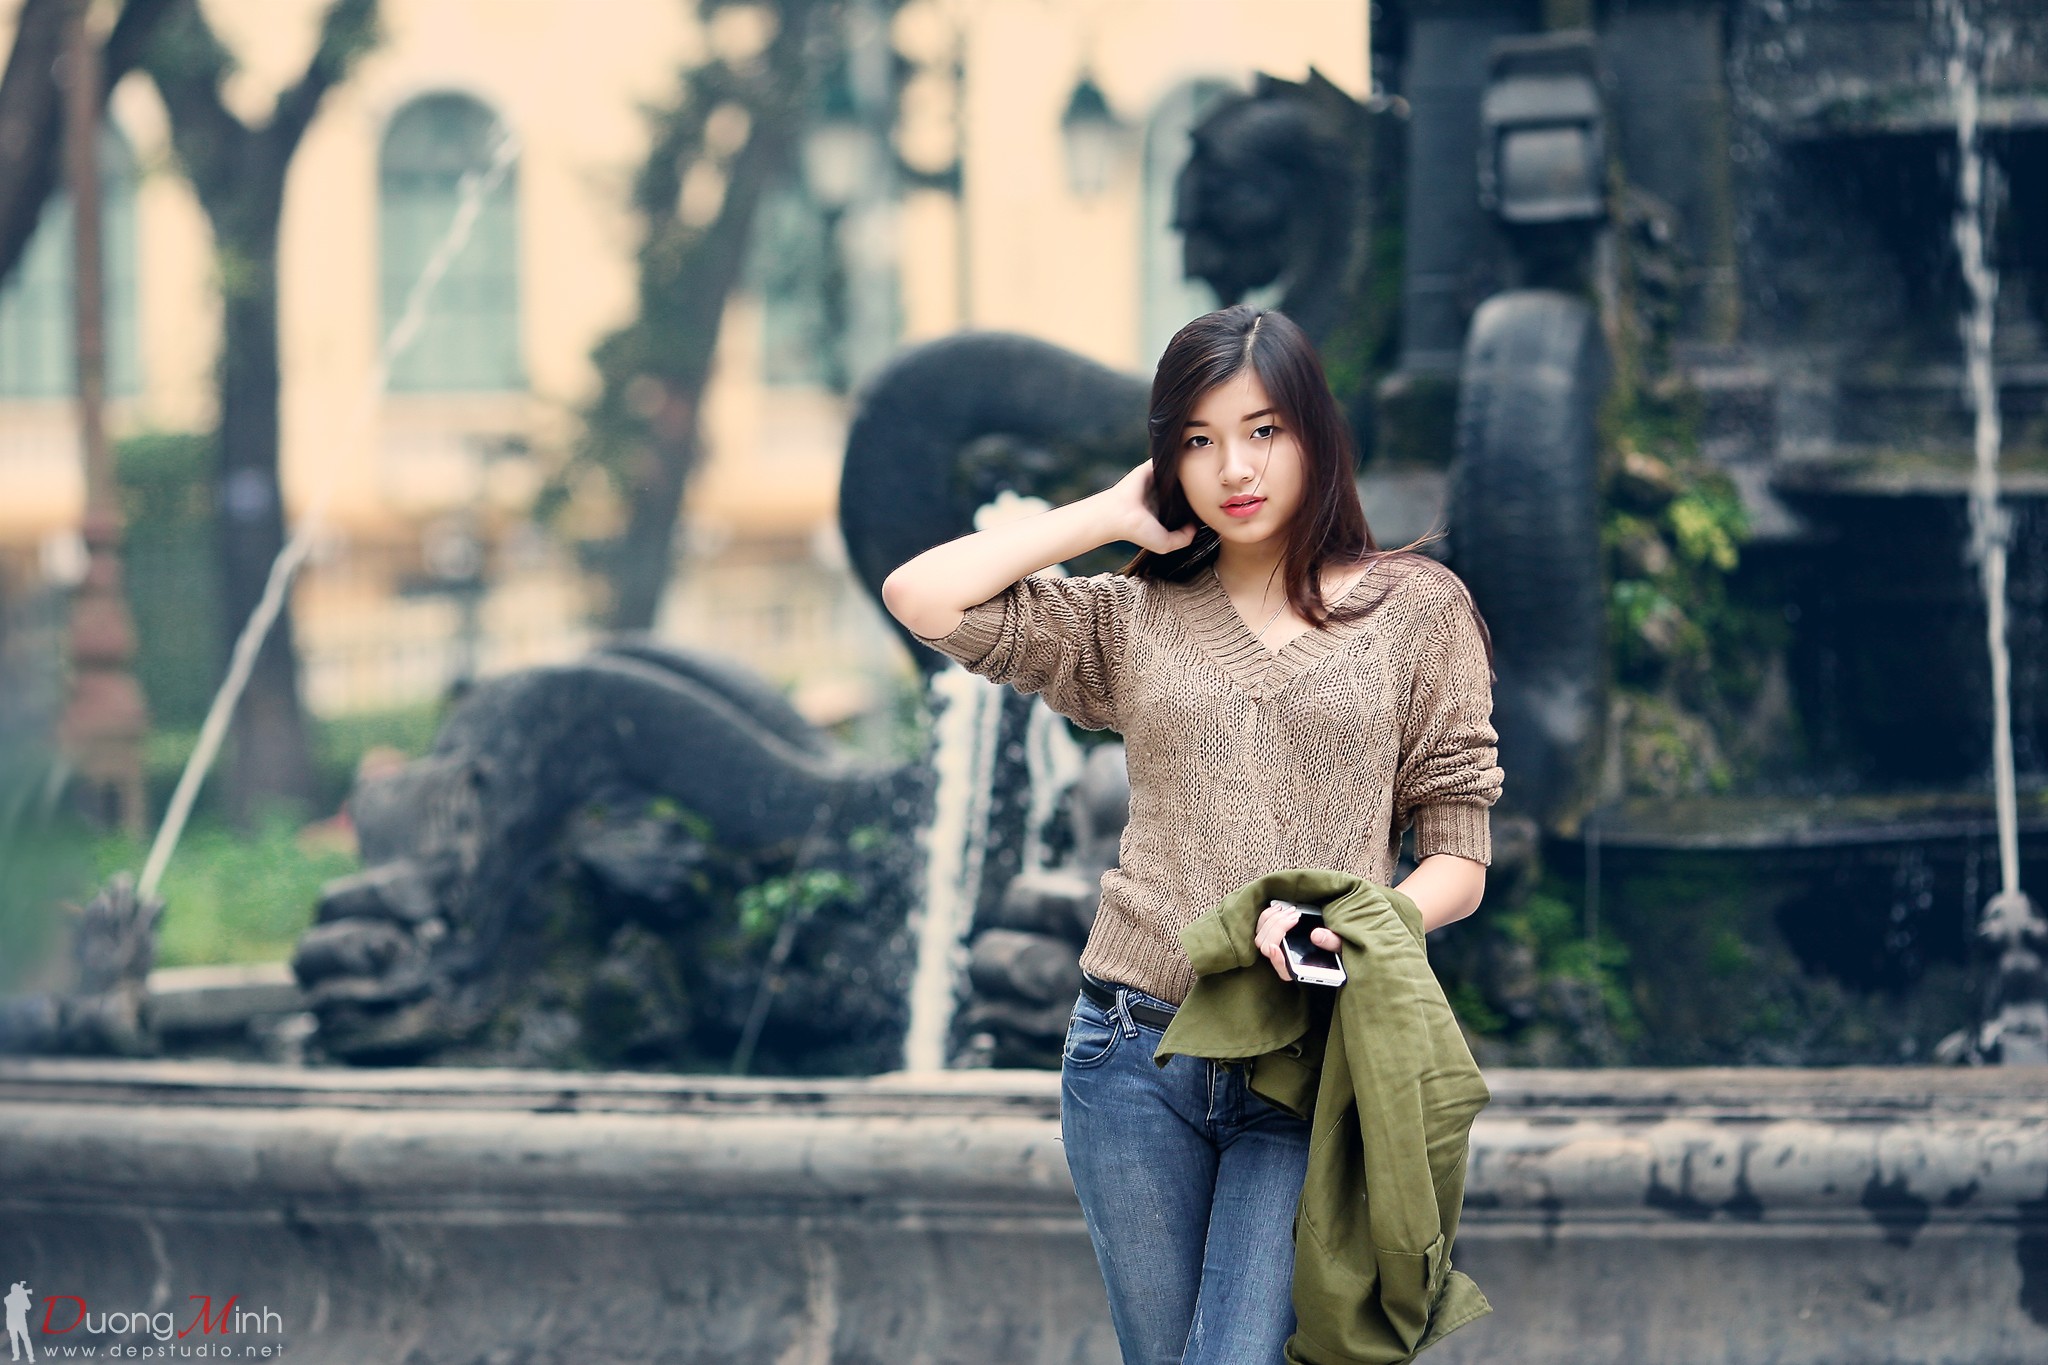 People 2048x1365 jeans women outdoors depth of field hands in hair looking at viewer brunette pullover portrait women fountain sweater standing Asian model watermarked